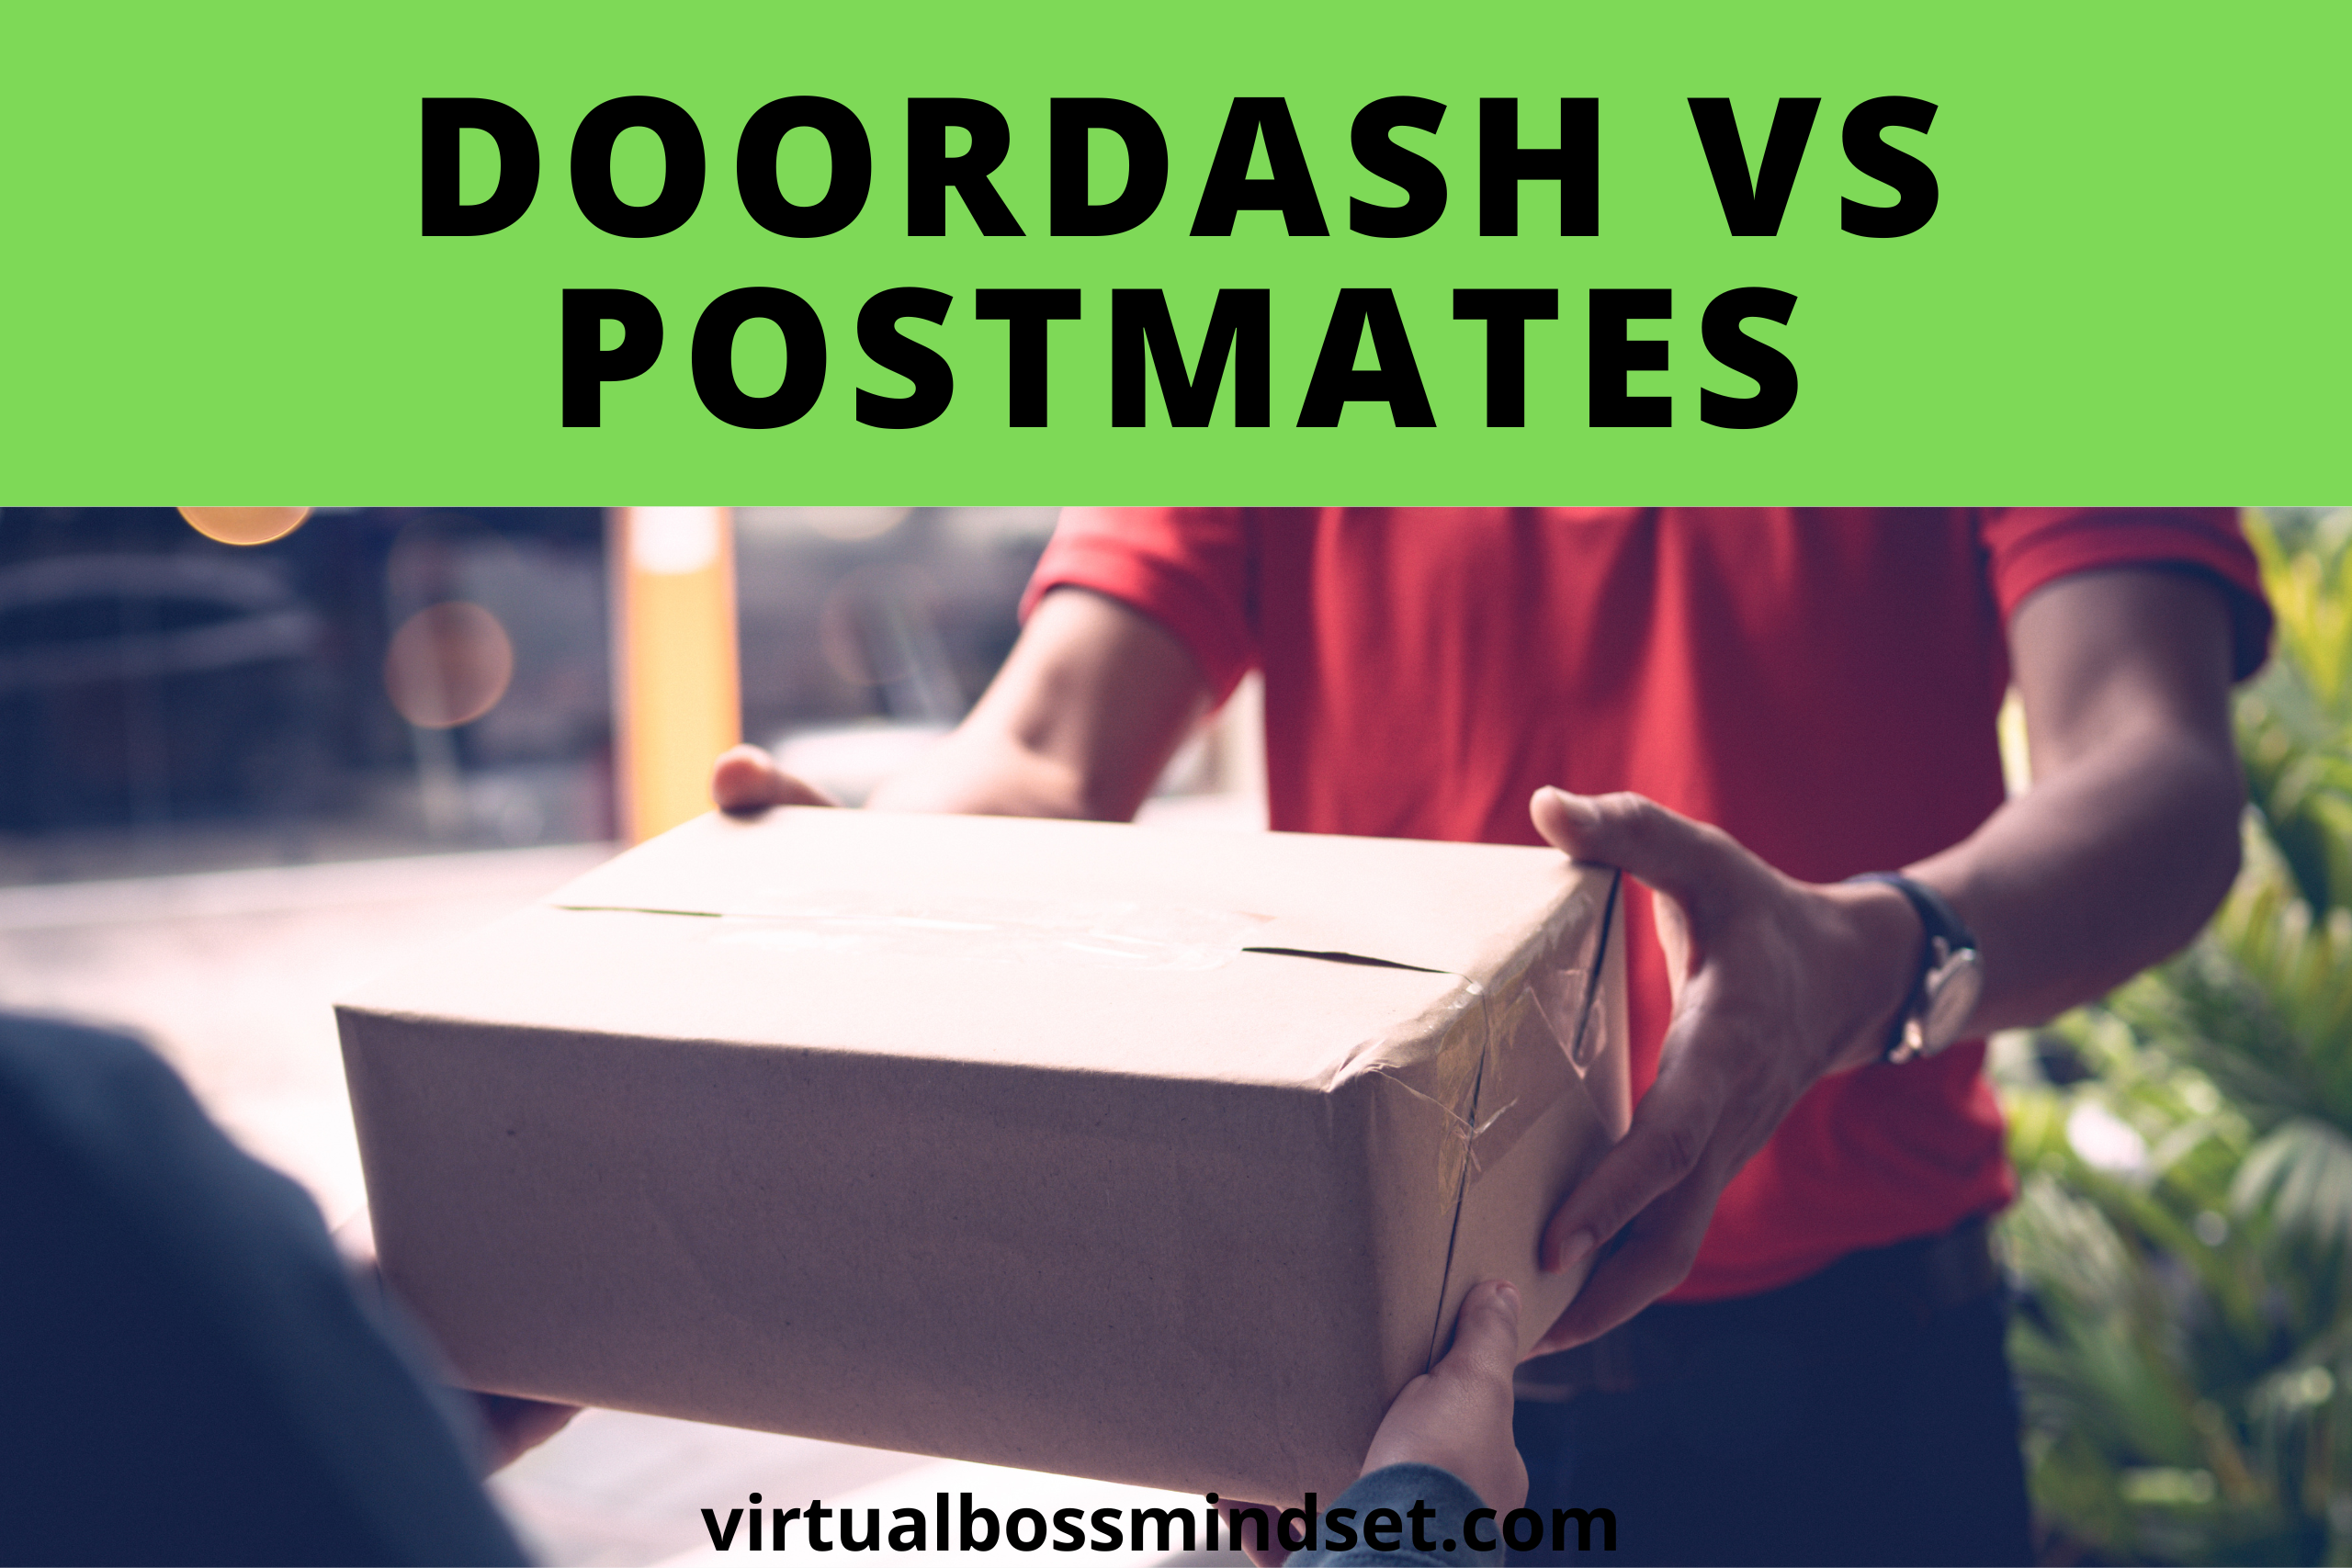 DoorDash vs. Postmates: Which Delivery App is Better?